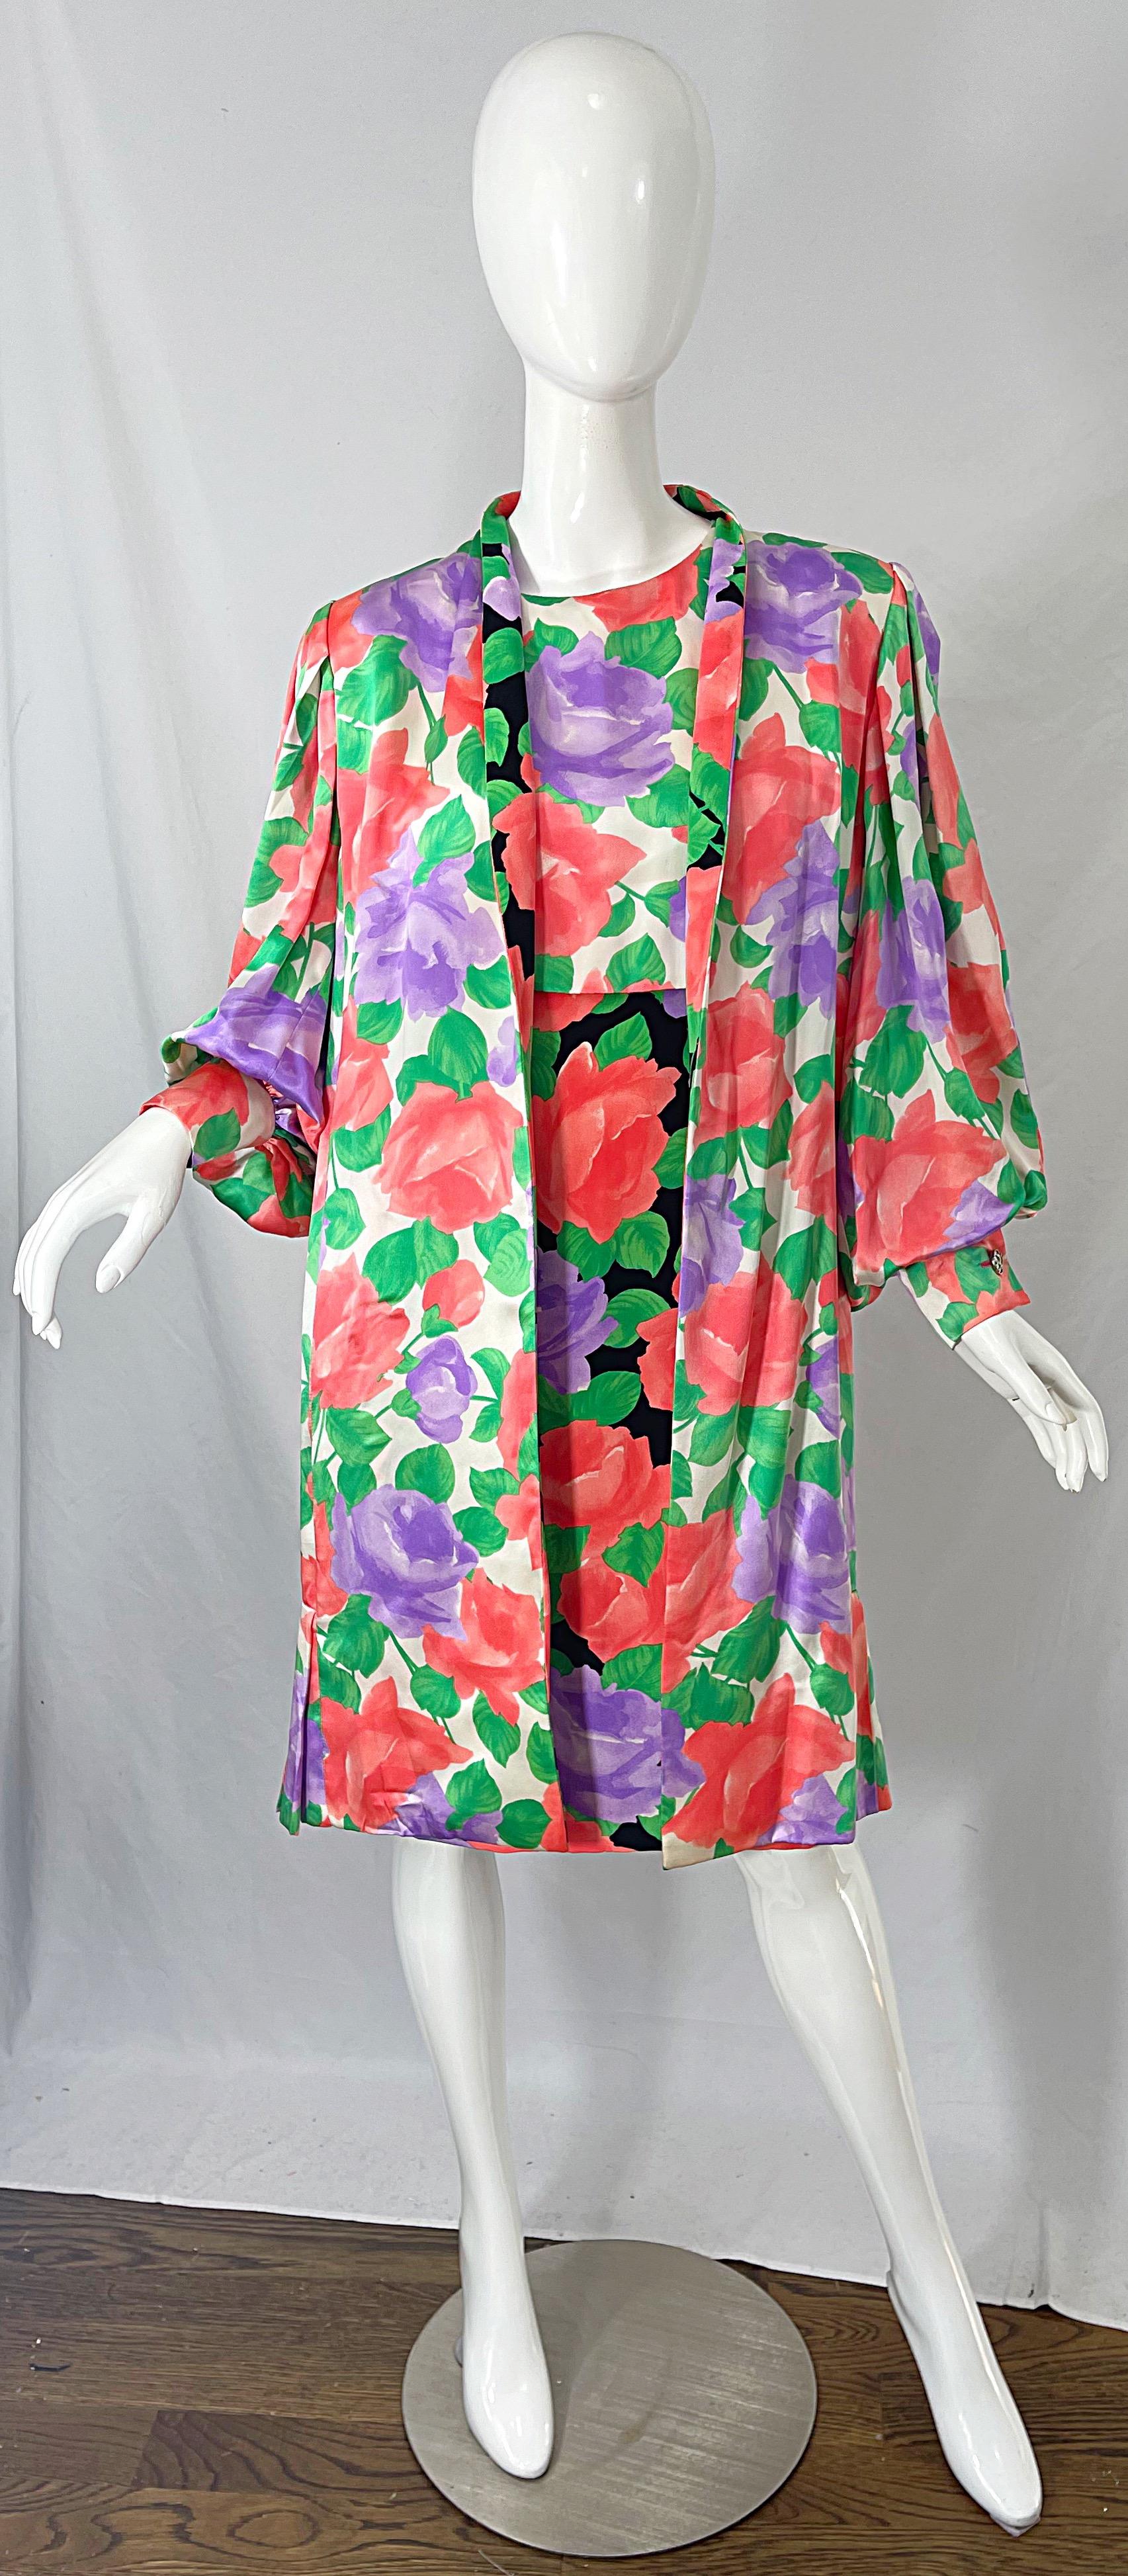 Fabulous 1980s JAMES GALANOS Couture rose printed long sleeve silk dress and matching swing jacket ! The dress features vibrant colors of black, pink, coral, purple, green and white throughout. Hidden zipper up the back with hook-and-eye closure.